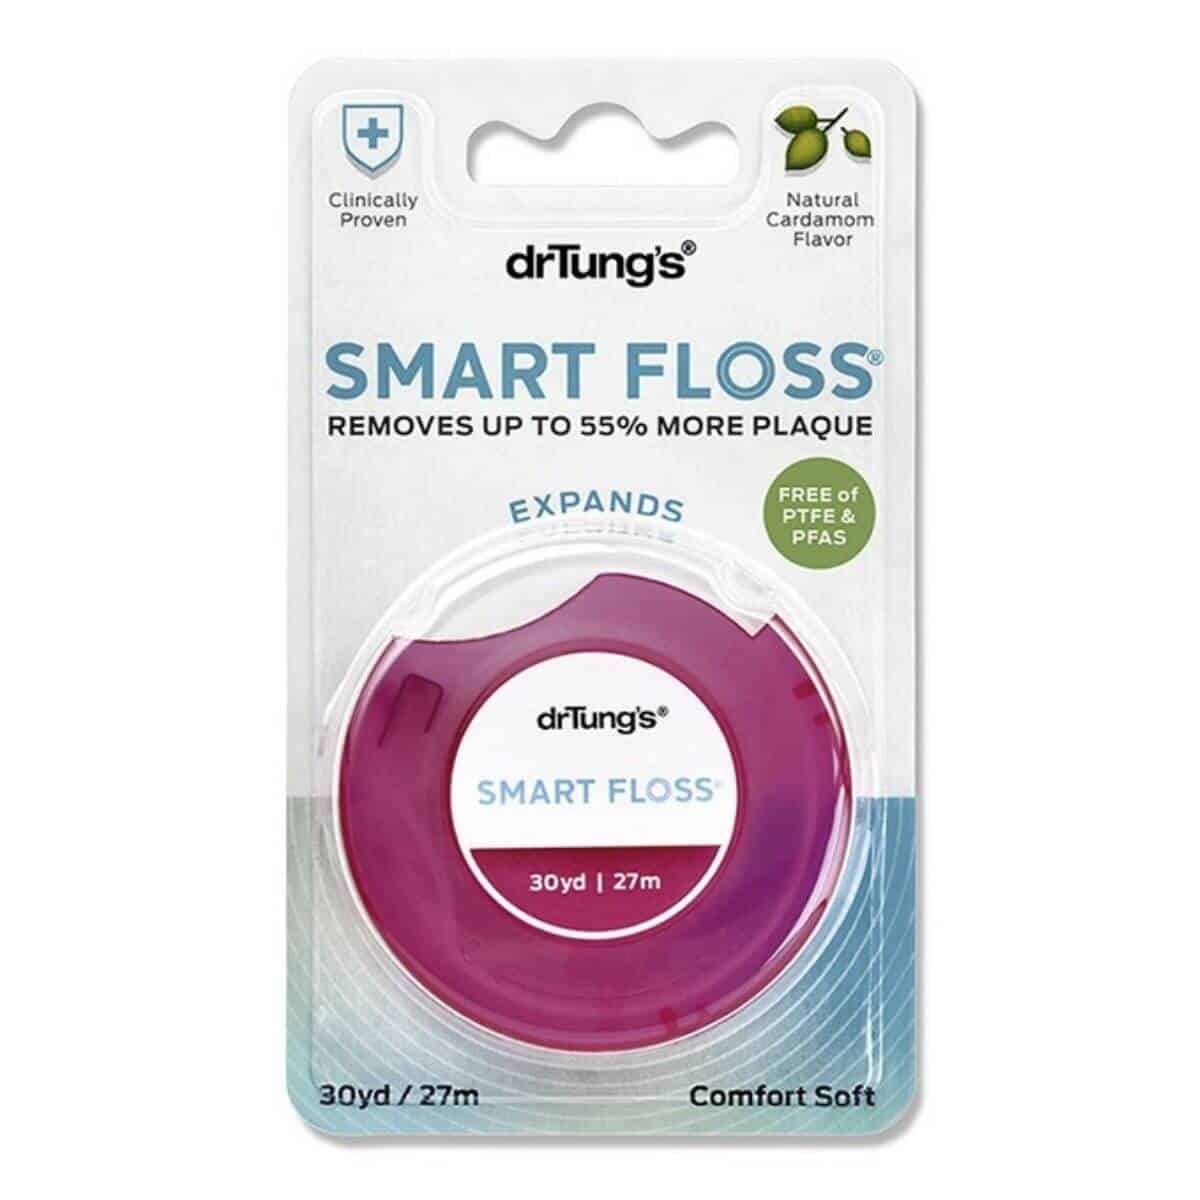 Dr. Tung's Smart Floss in its packaging.